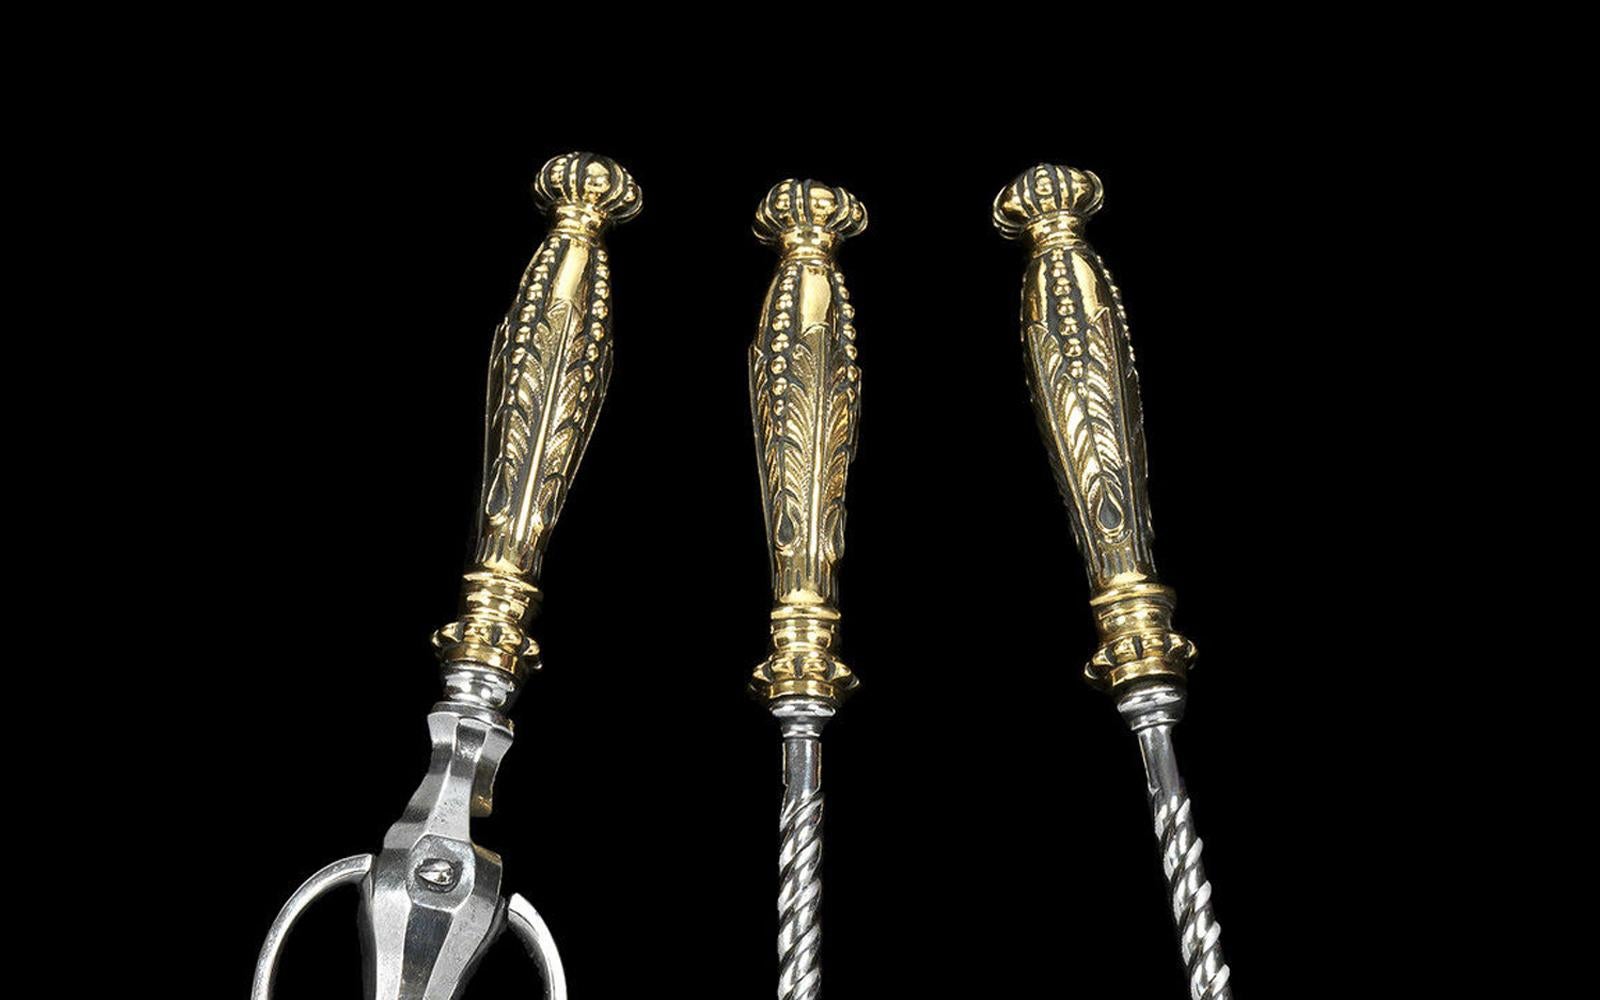 With elaborate brass knob handles and twisted steel stems.
   